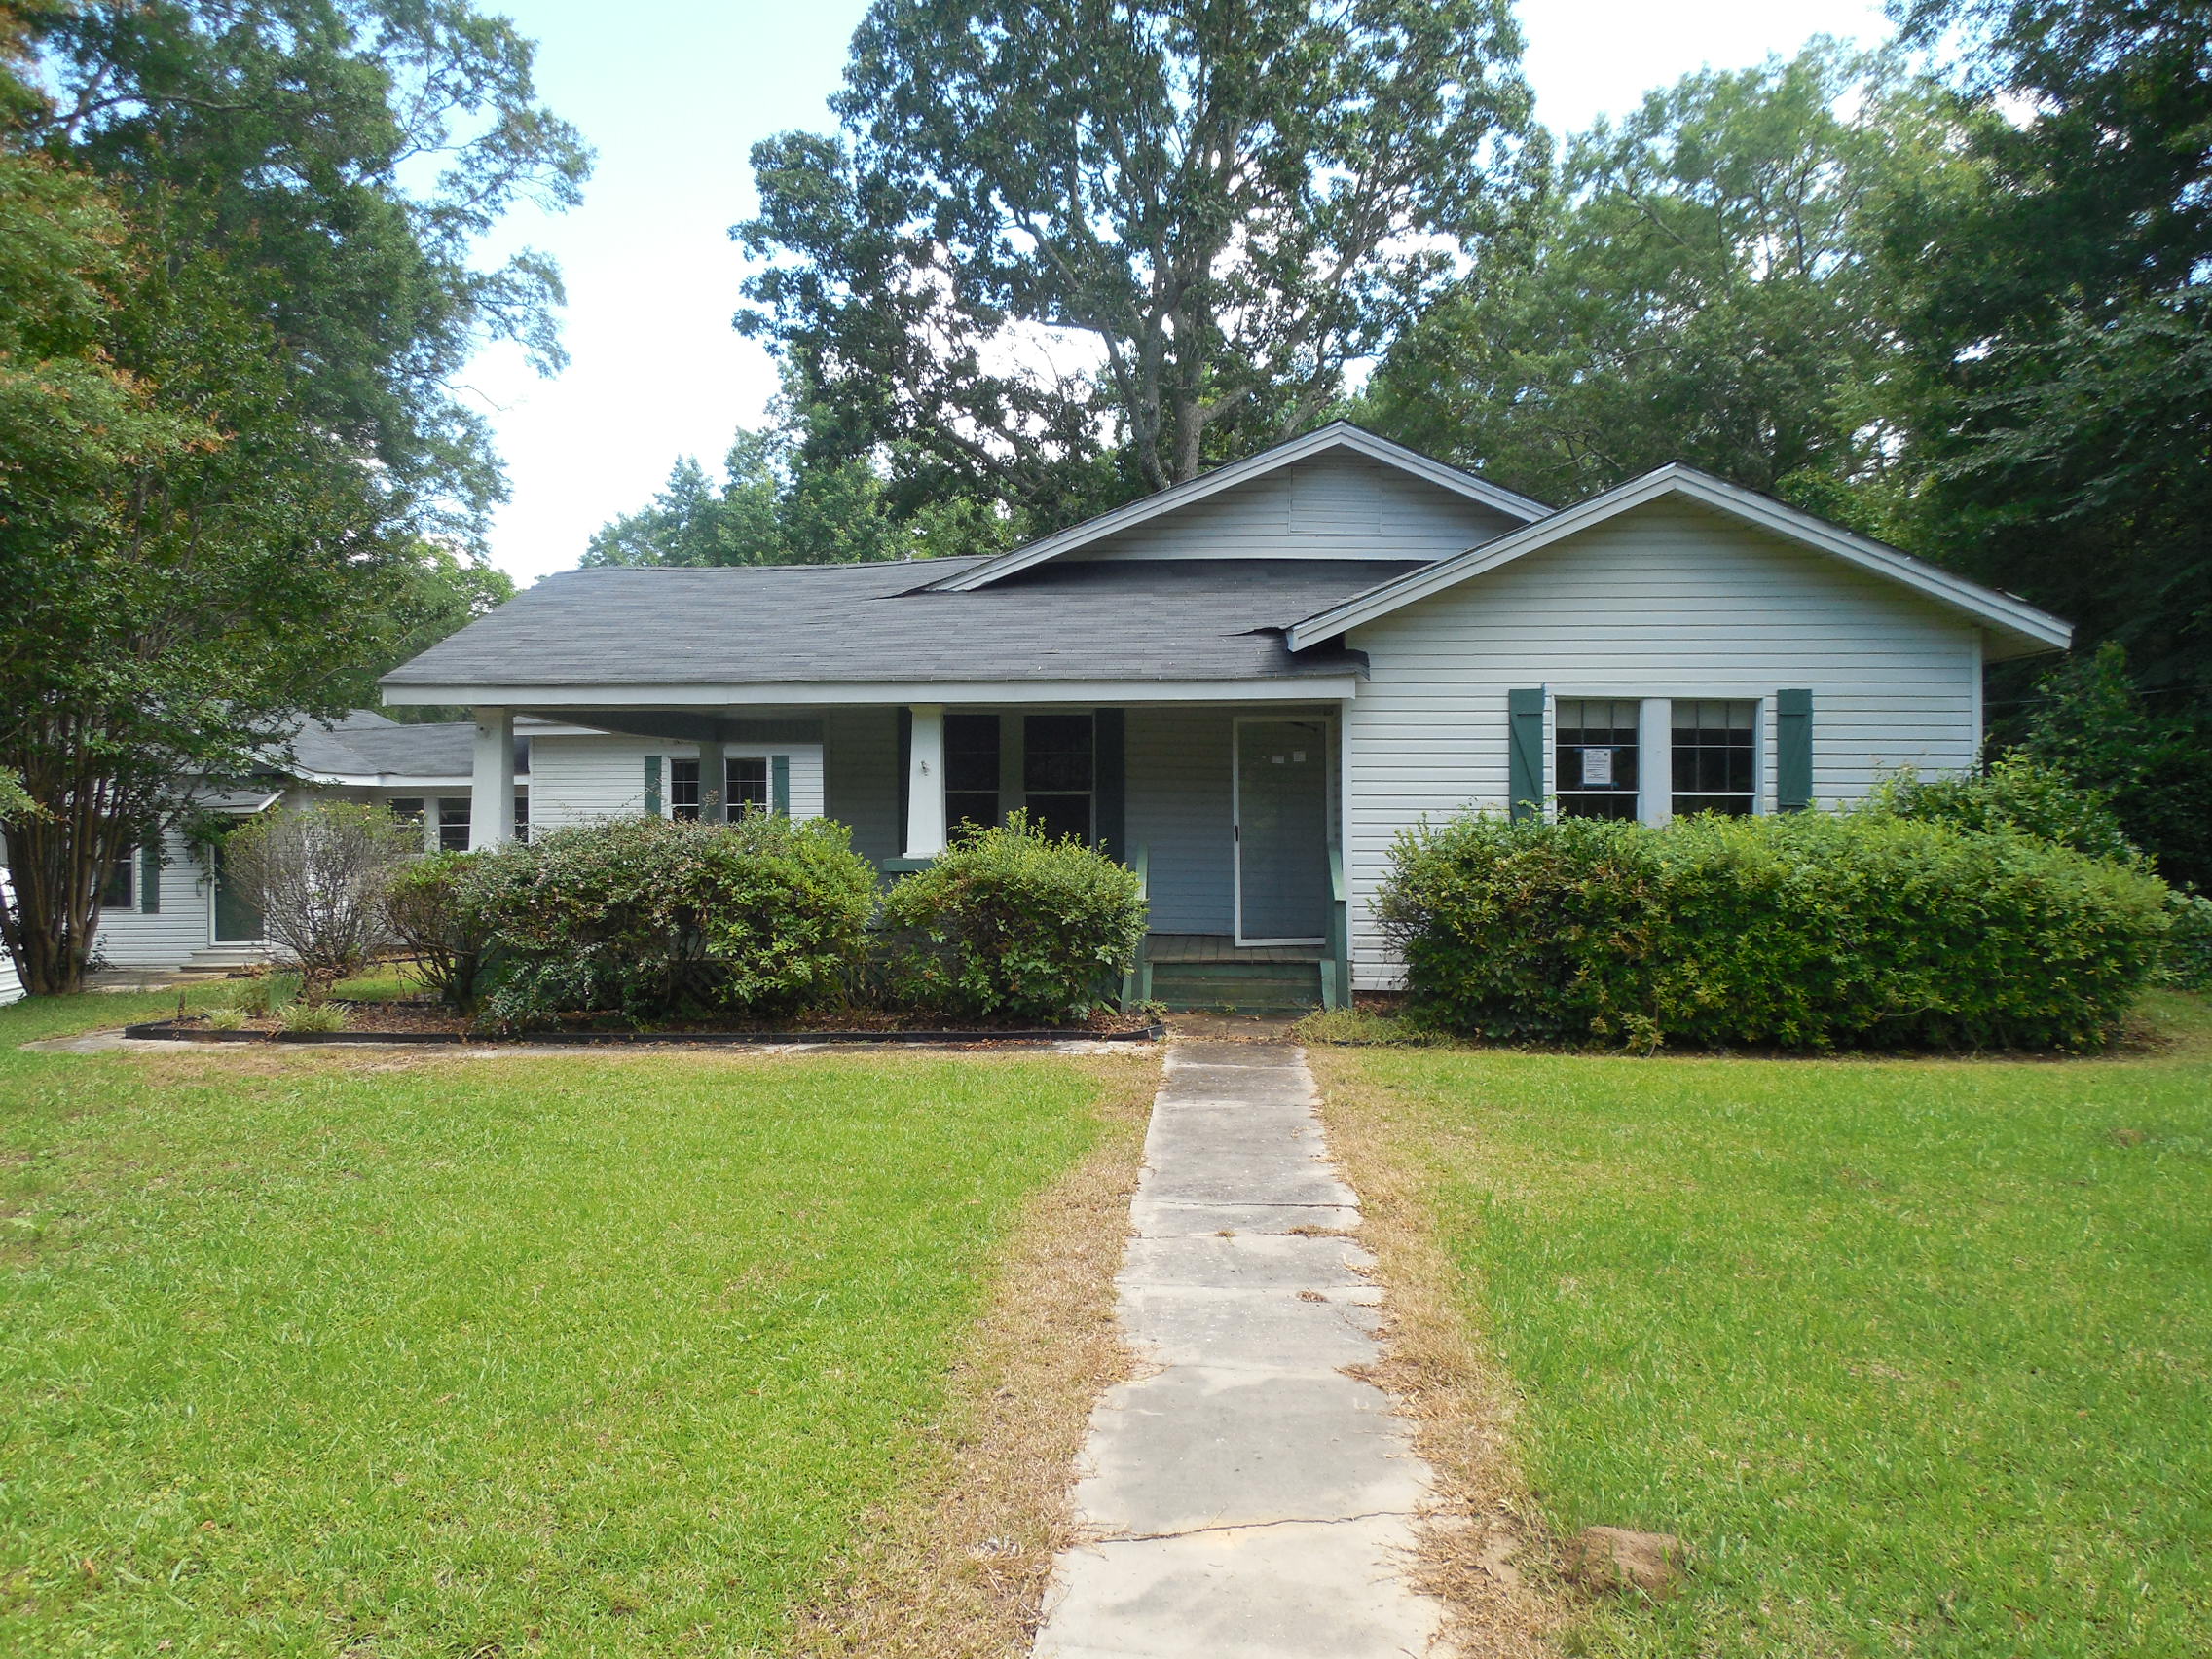 194 Fifth StDecatur, MS, 39327Newton County